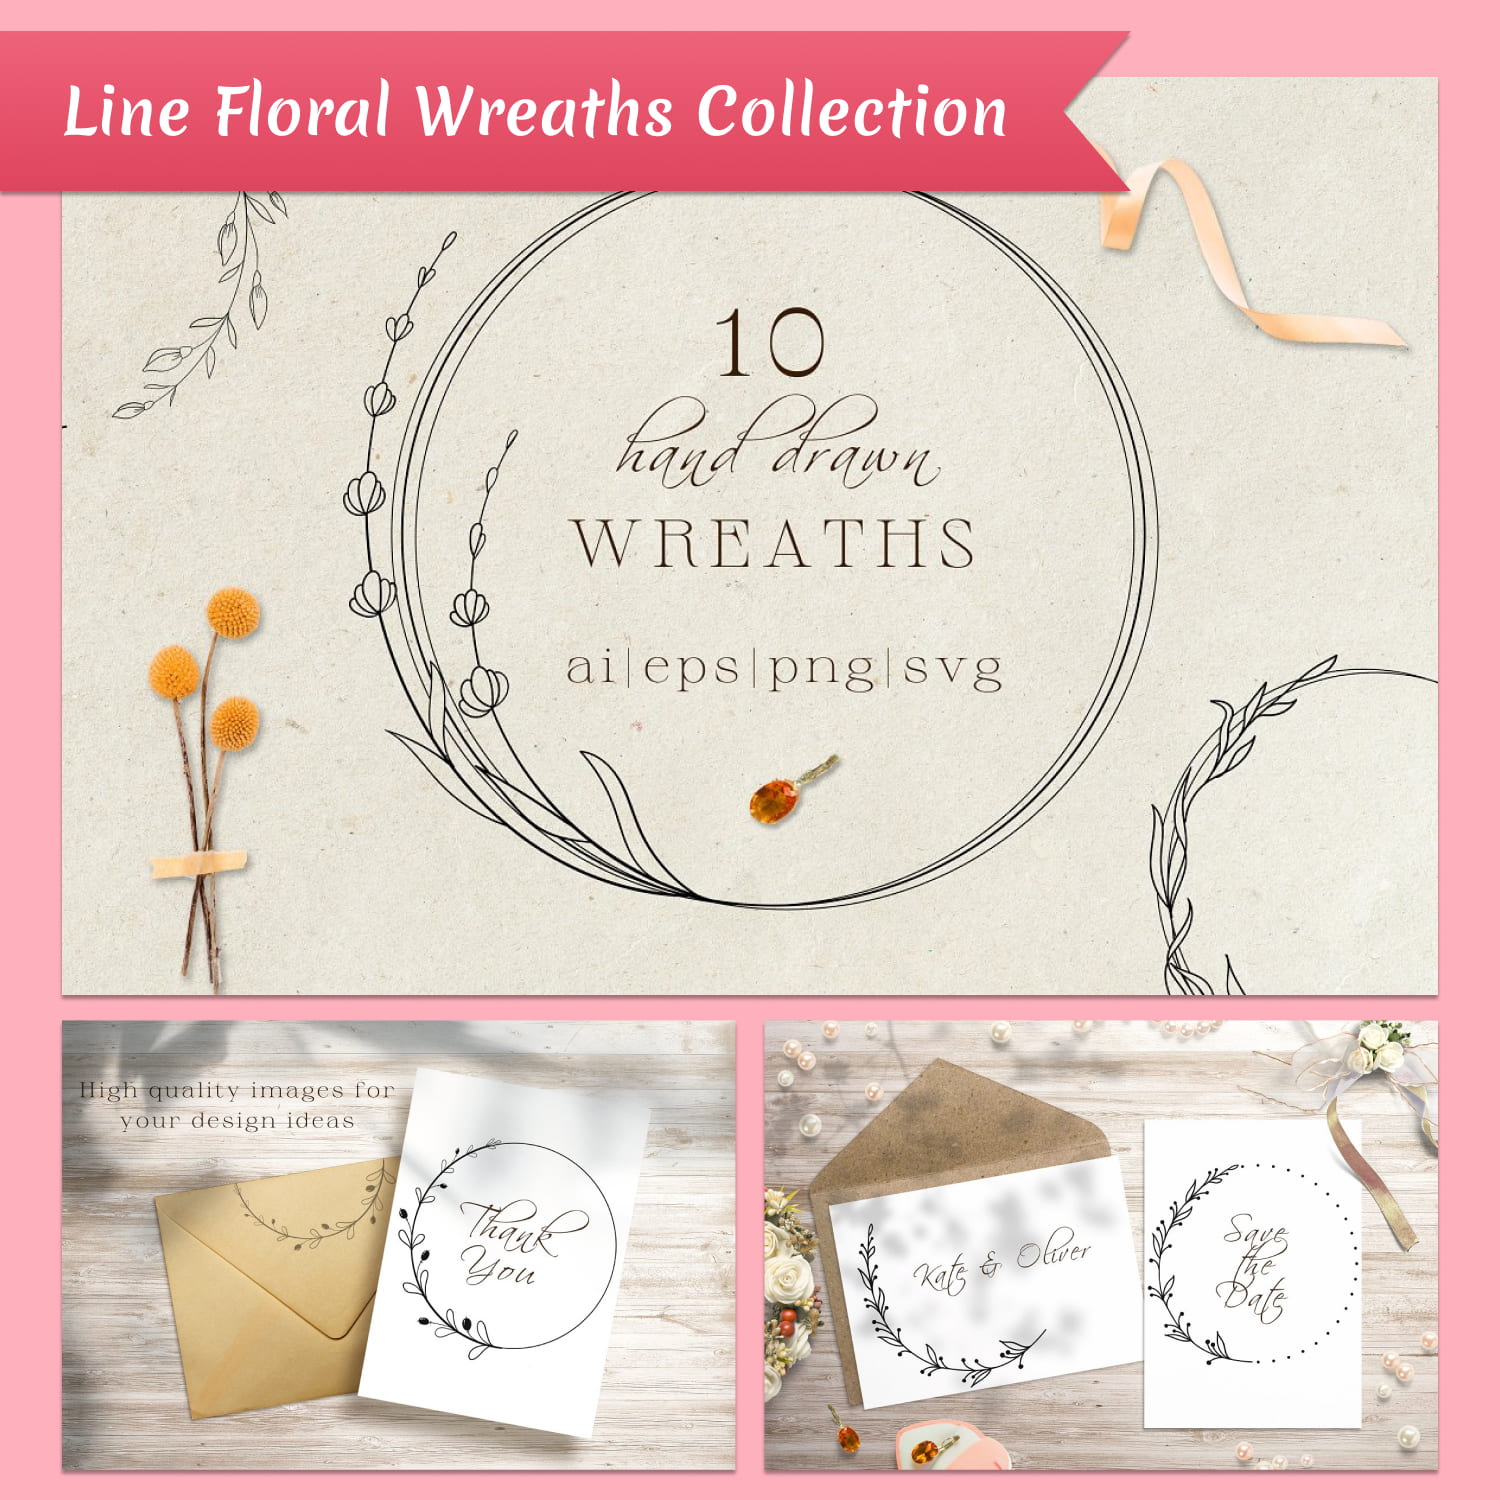 Line Floral Wreaths Handdrawn Collection cover image.